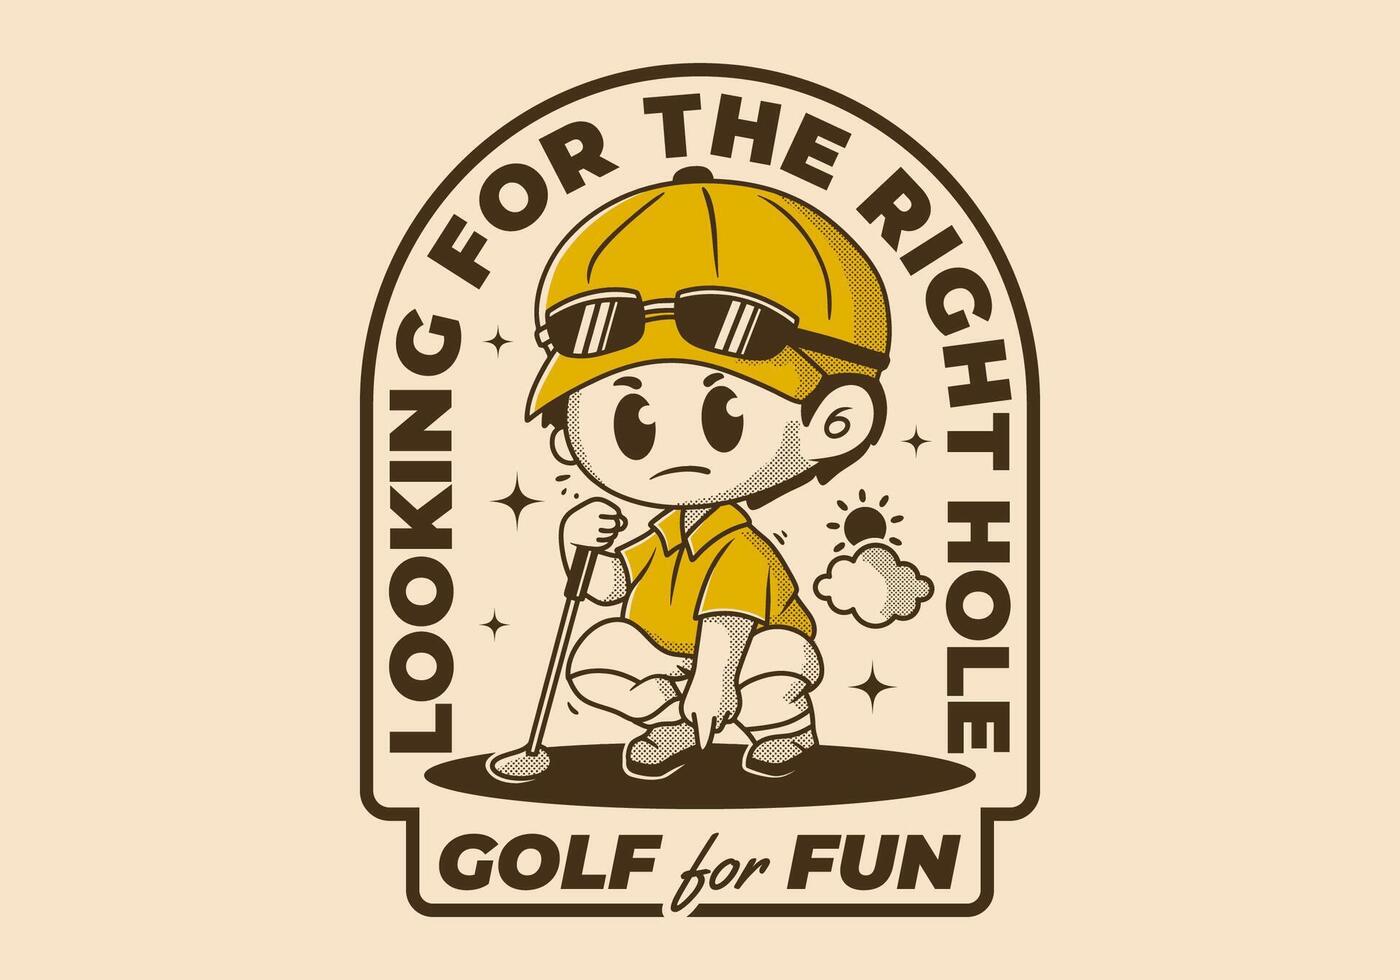 Looking for the right hole. Character illustration of a guy holding a golf stick vector